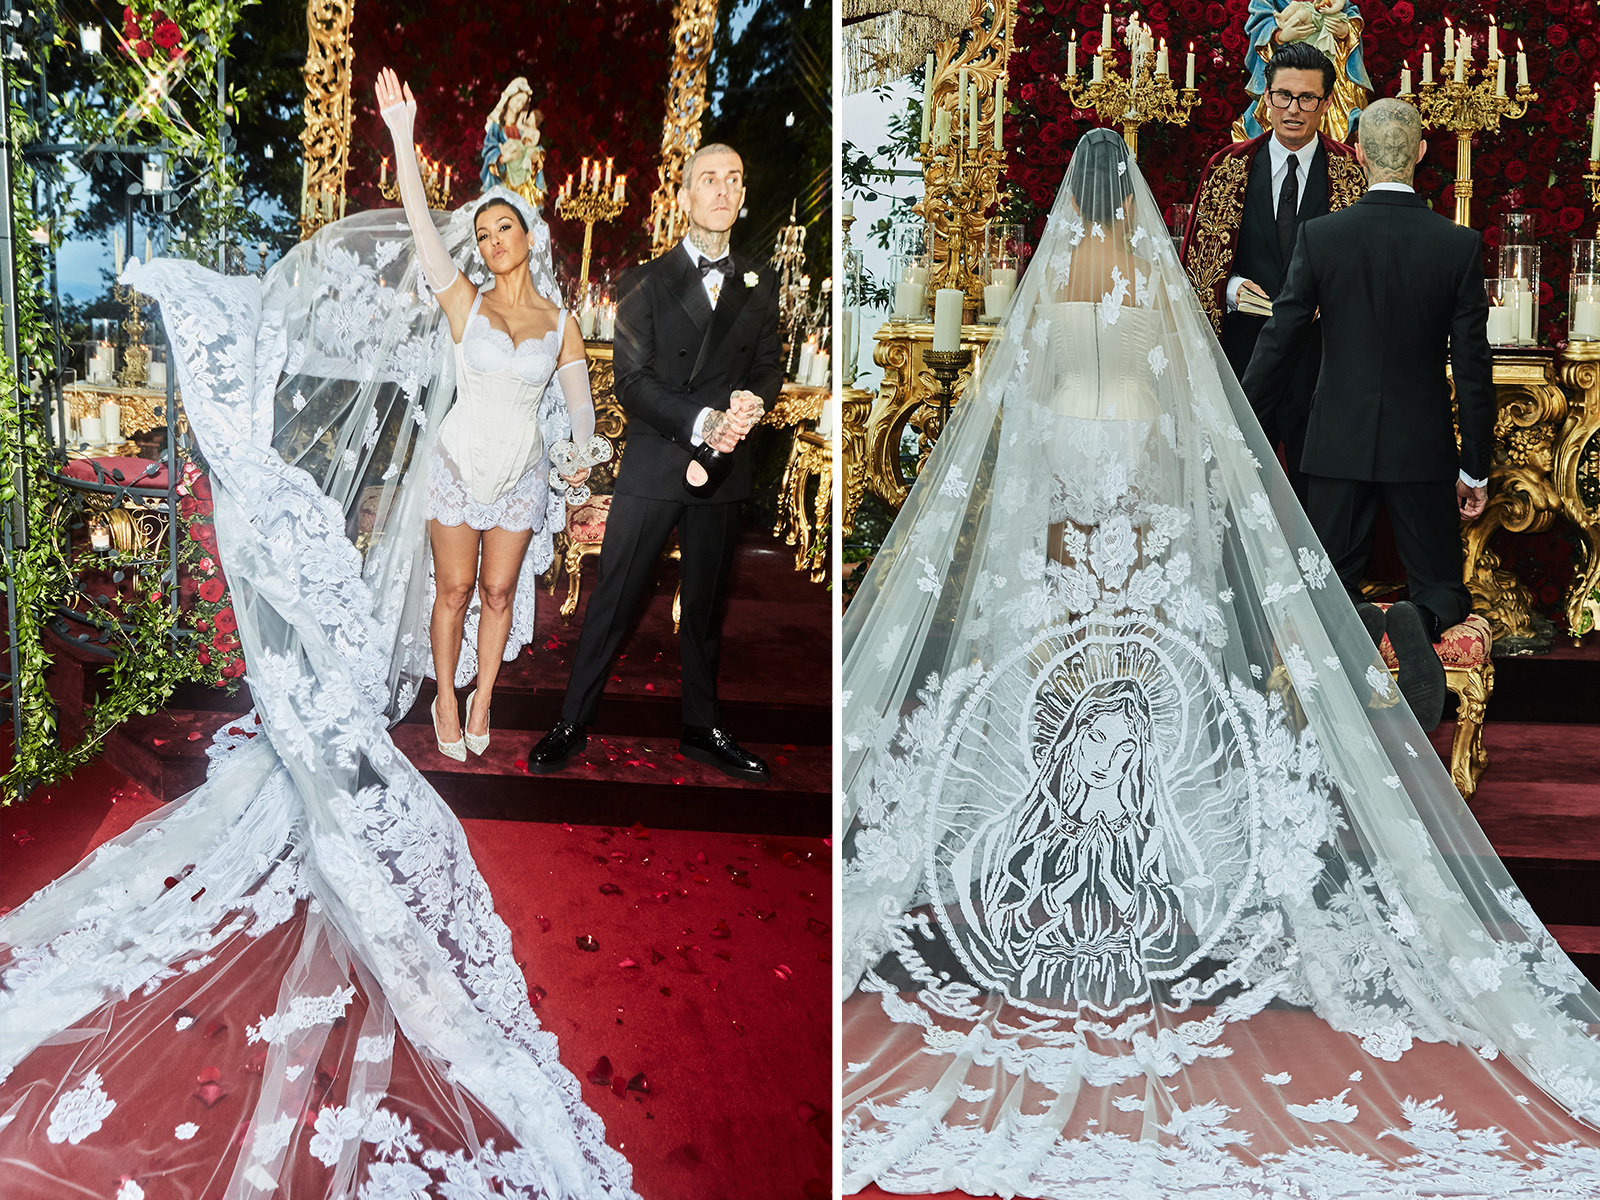 Dramatic veil paying tribute to groom Travis Barker's 'Virgin Mary' head  tattoo to gothic corset dress: STUNNING details from Kourtney Kardashian's  intimate wedding look!